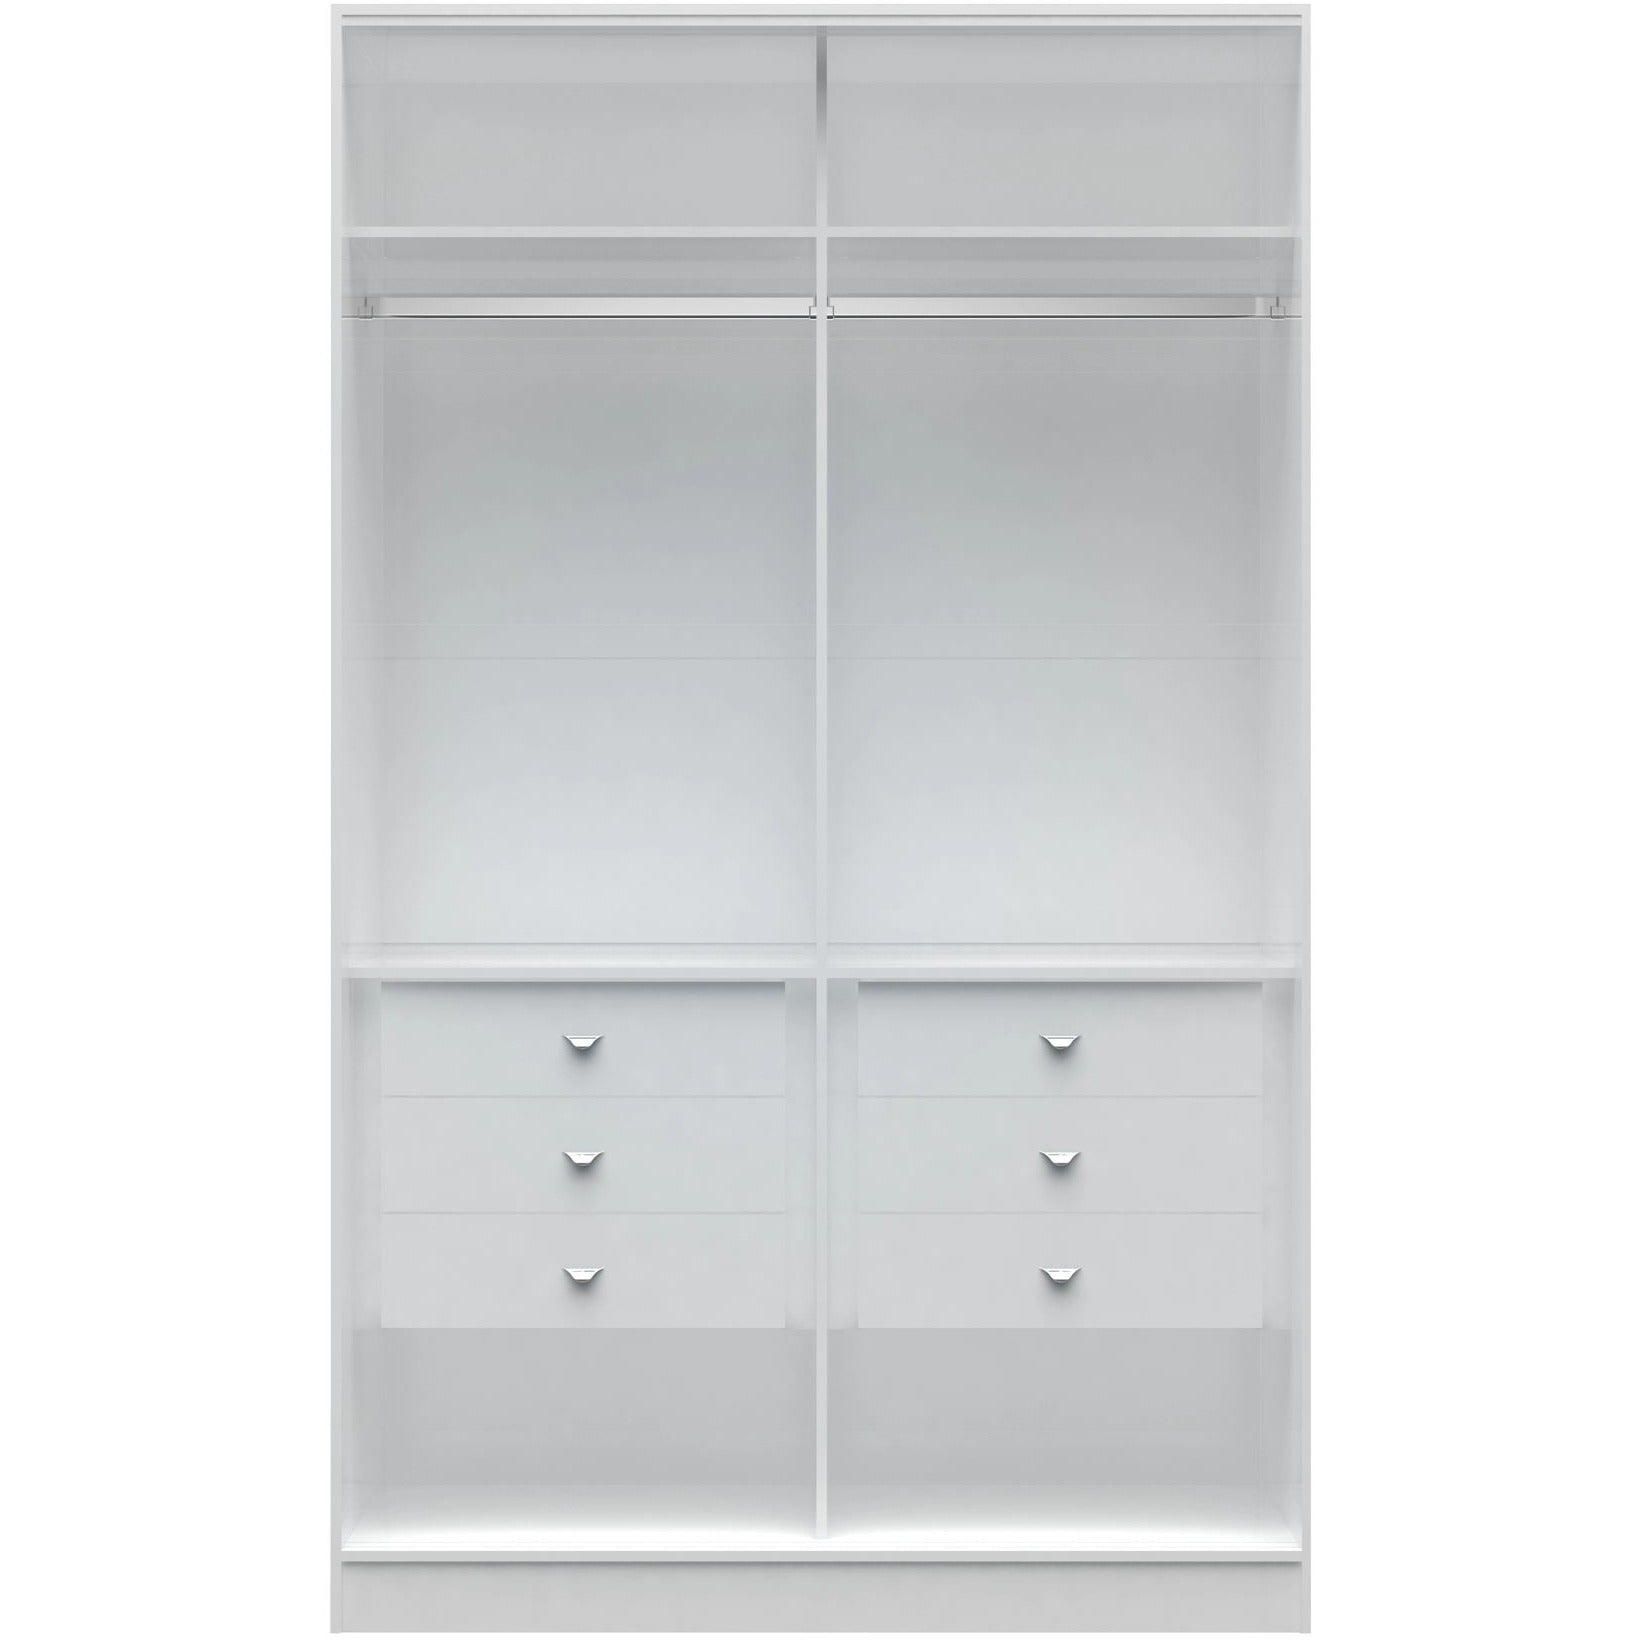 Manhattan Comfort Chelsea 1.0 - 54.33 inch Wide He/She Wardrobe with 6 Drawers in White-Minimal & Modern